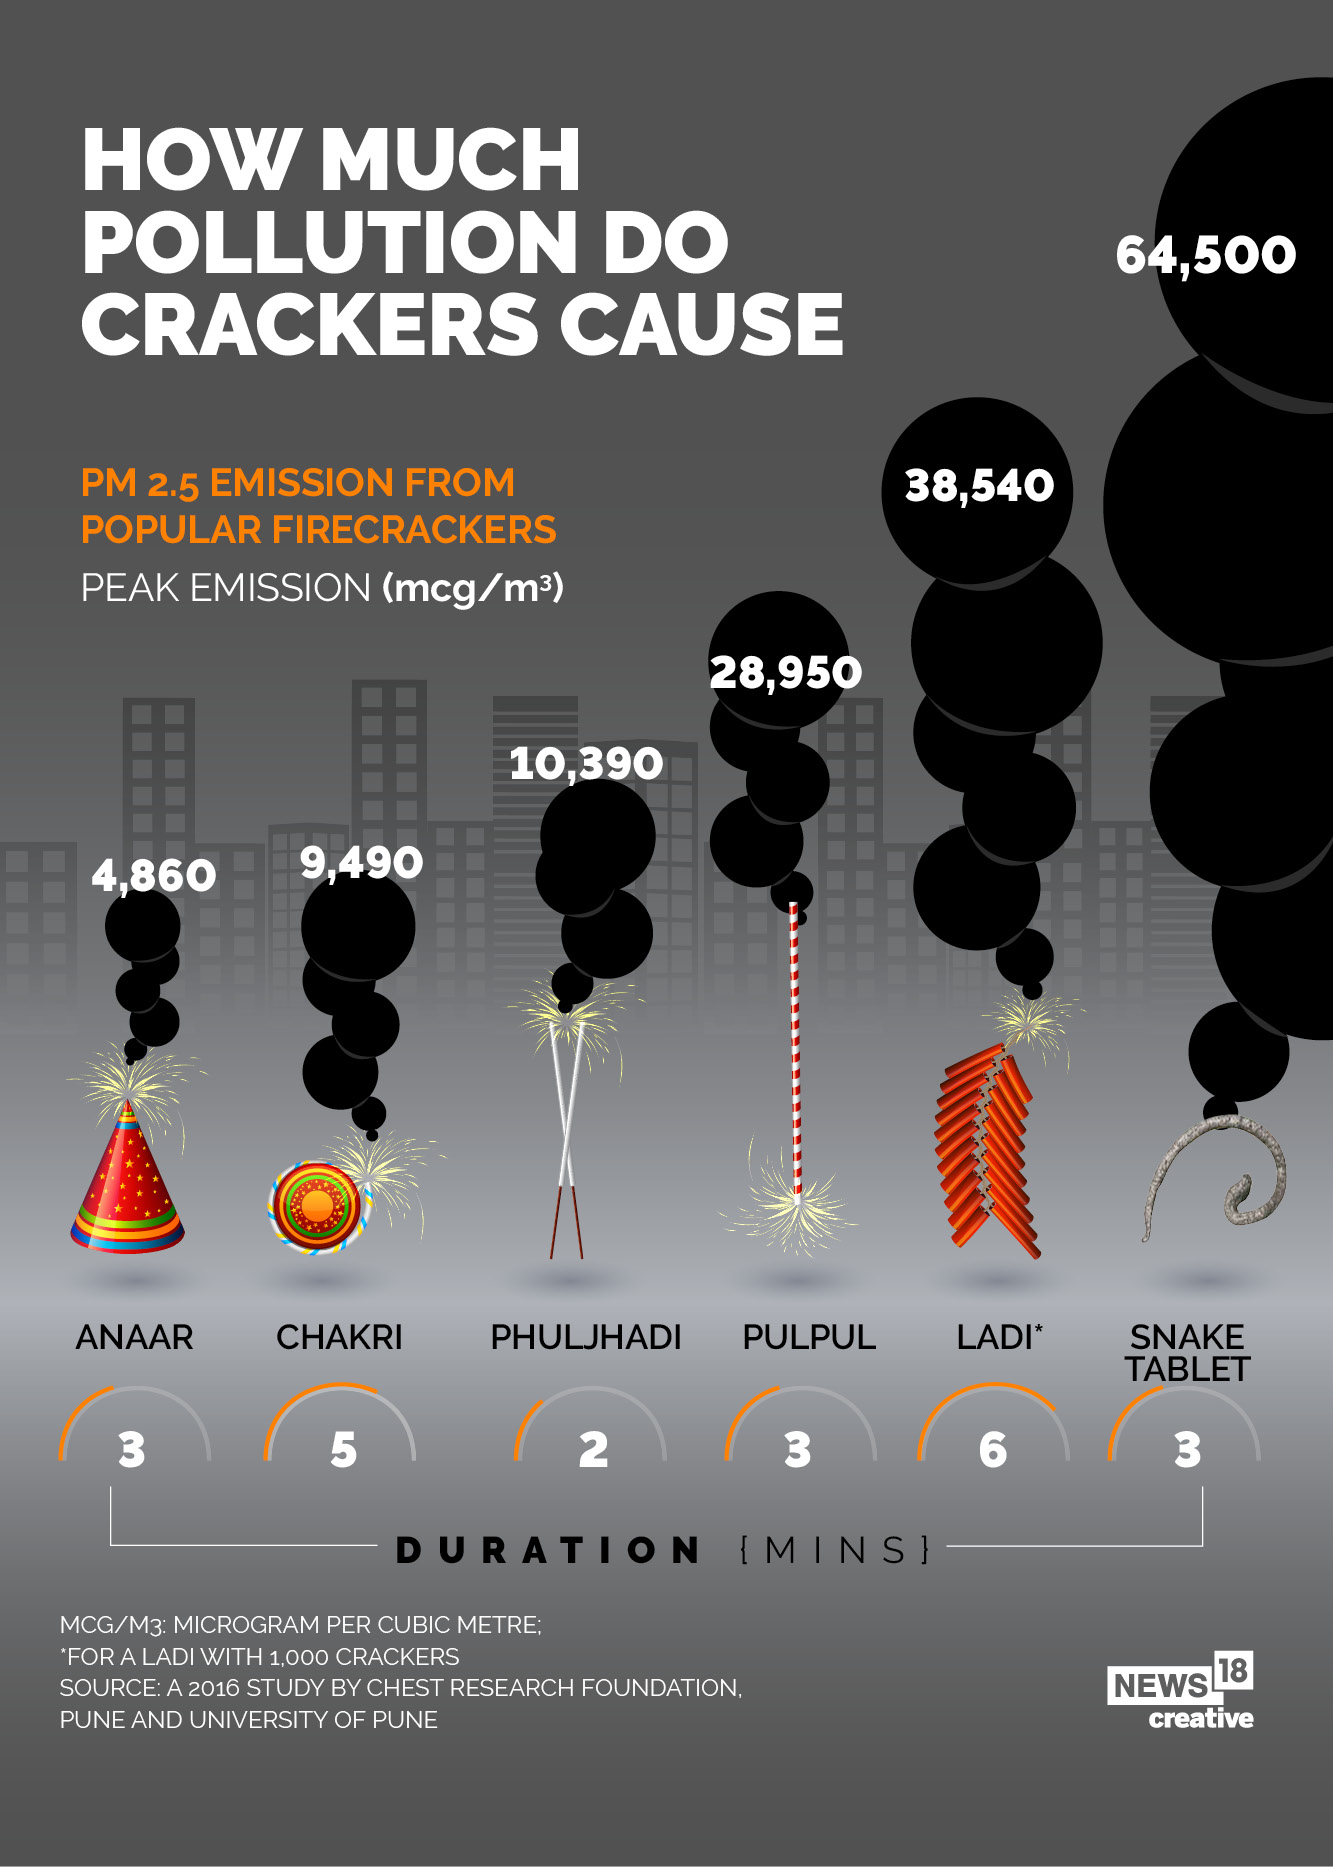 Diwali 2020: How harmful are firecrackers really?